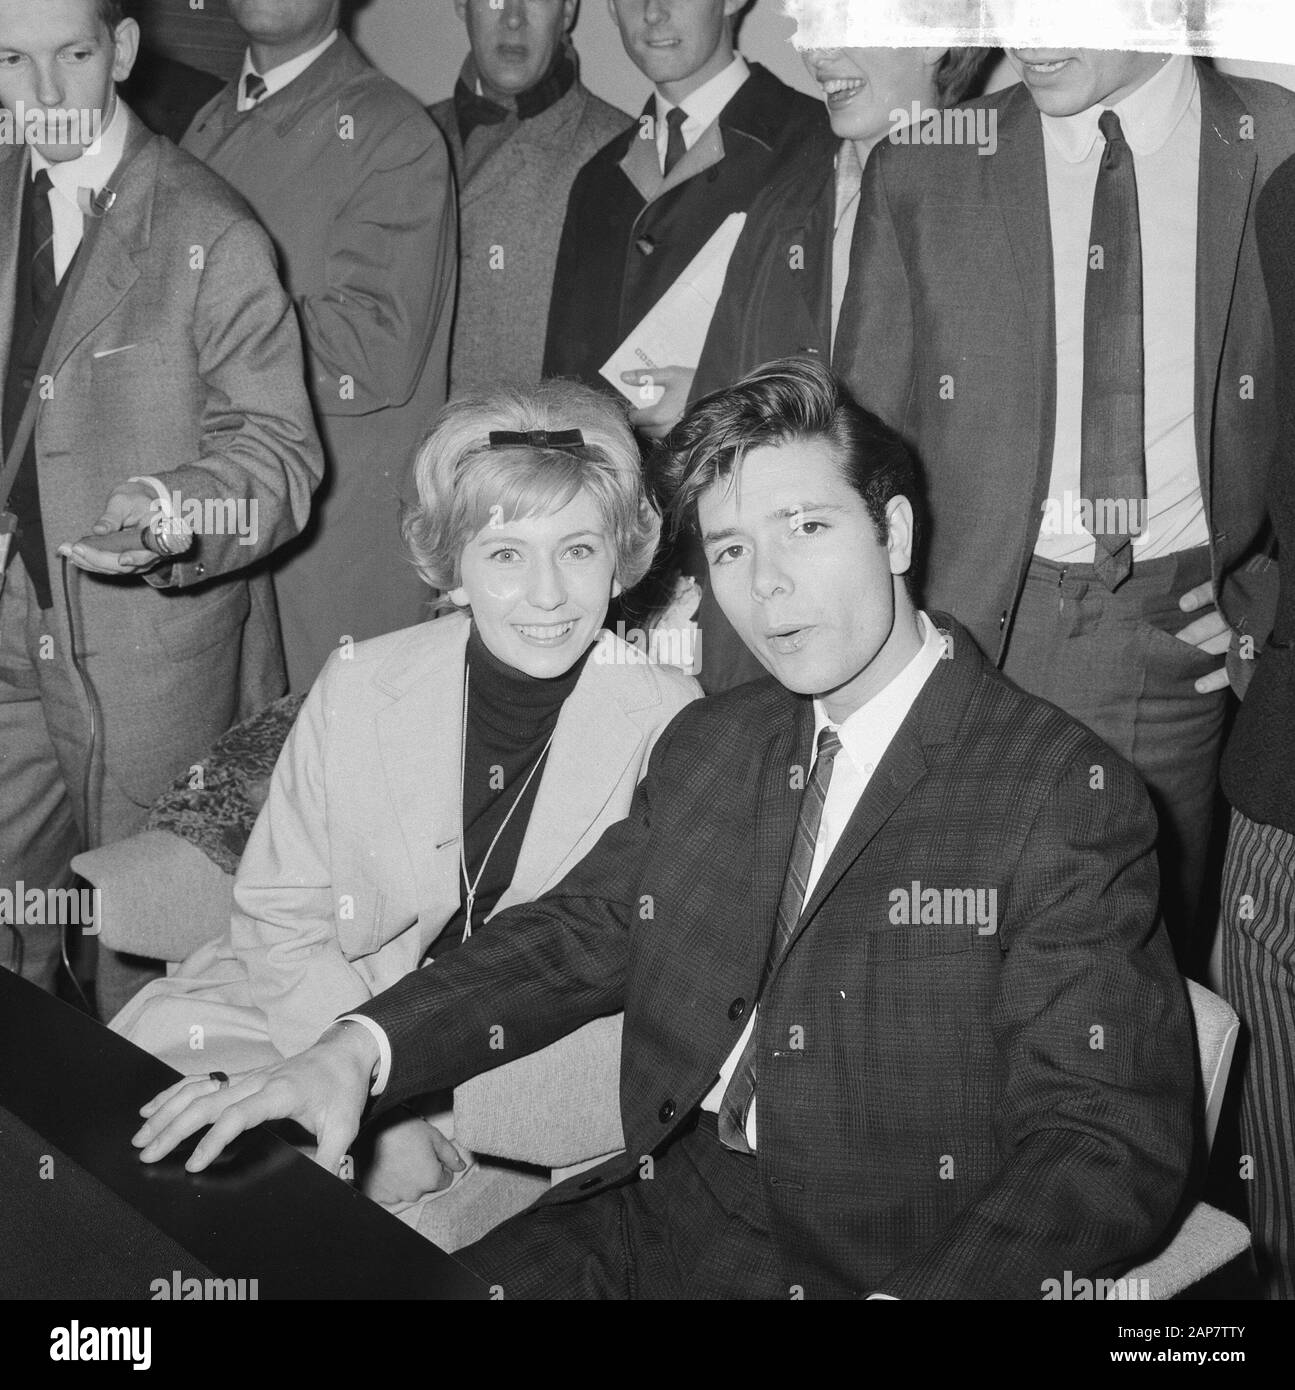 Cliff Richard, arrival at Schiphol with Willeke Alberti during press conference Date: May 5, 1964 Location: Noord-Holland, Schiphol Keywords: arrivals, press conferences Personal name: Alberti, Willeke, Richard, Cliff Stock Photo